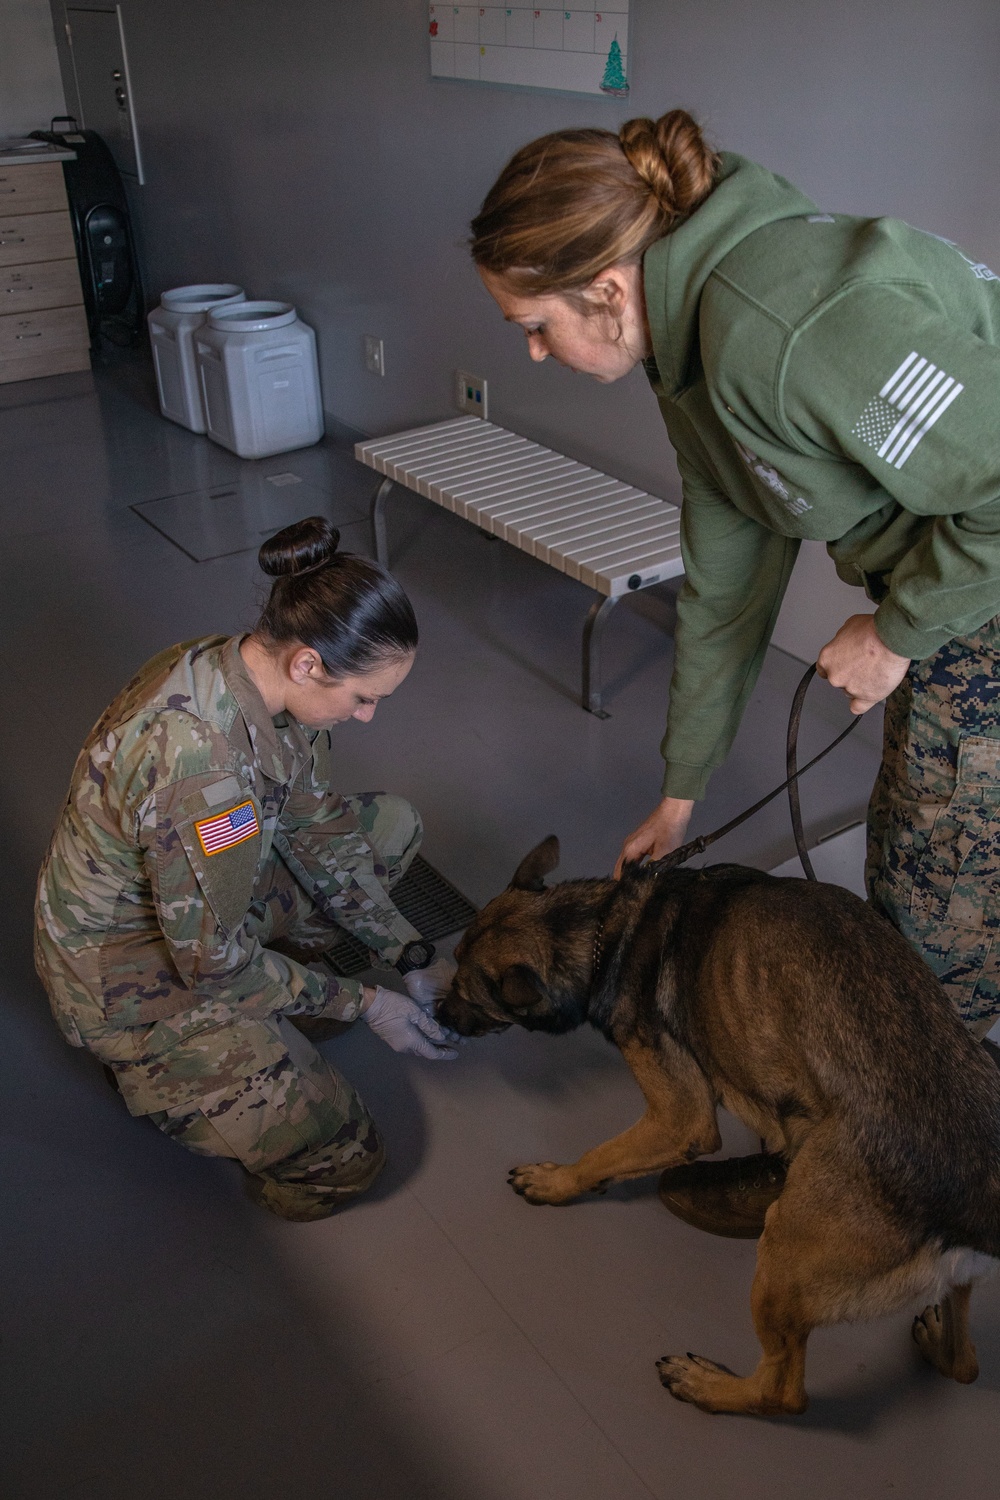 Canine’s best friend: US Army Soldier embraces job as animal care specialist on Marine Corps Air Station Iwakuni